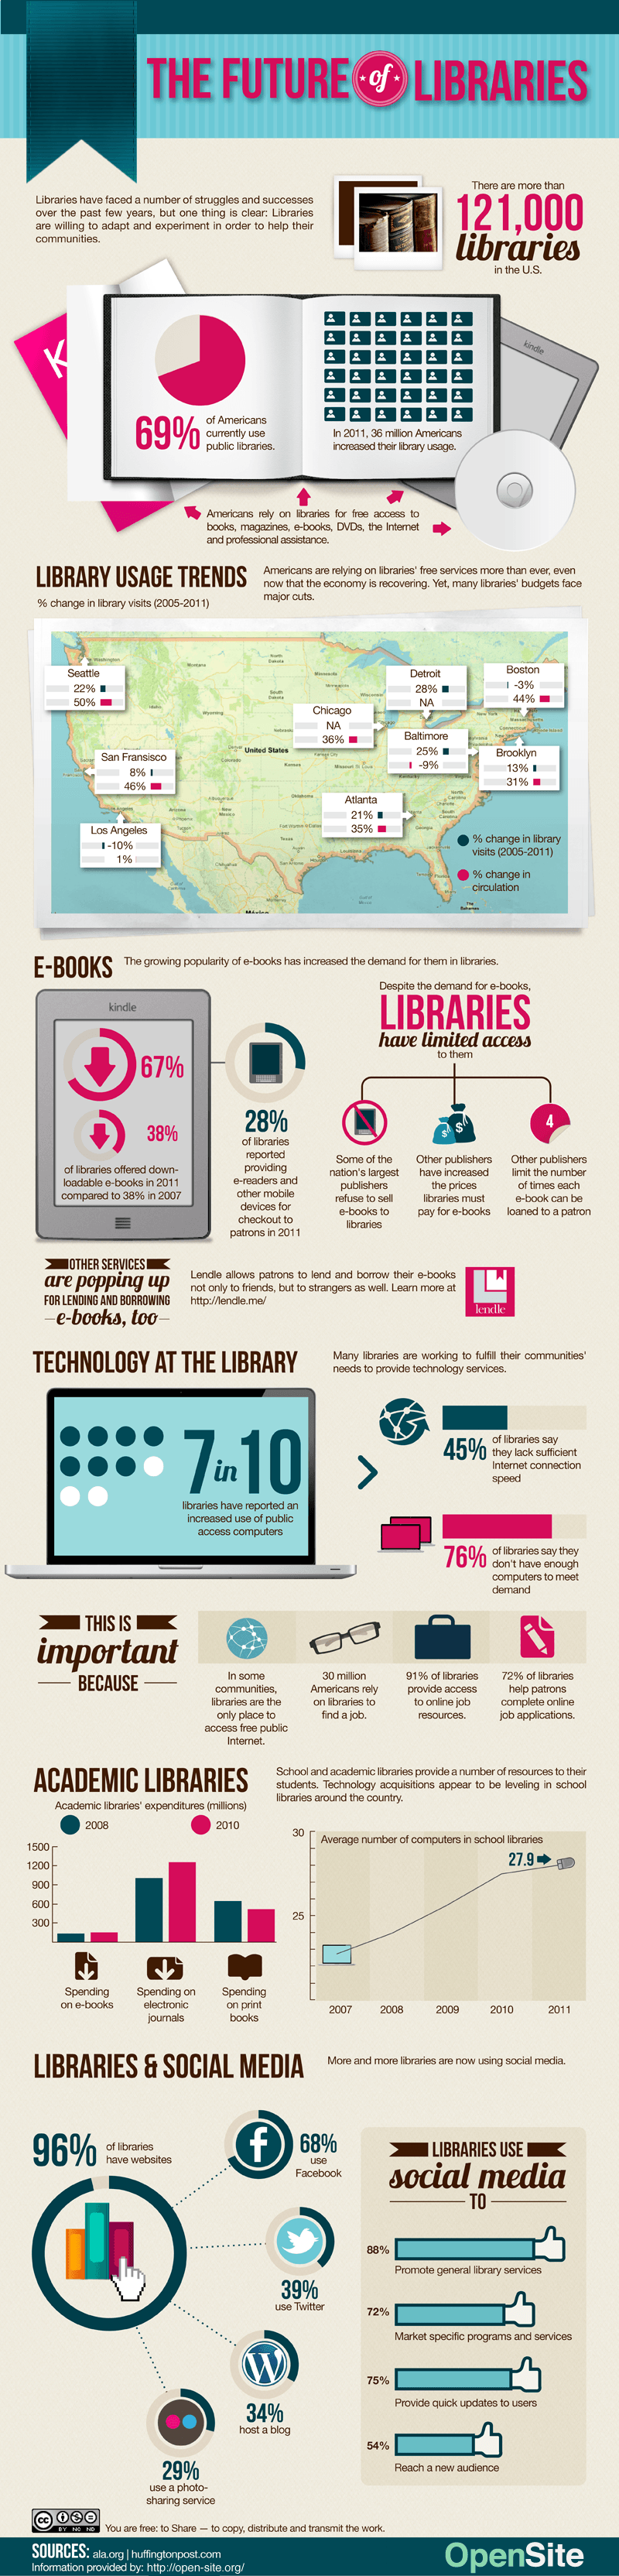 Libraries matter: 18 fantastic library infographics and charts